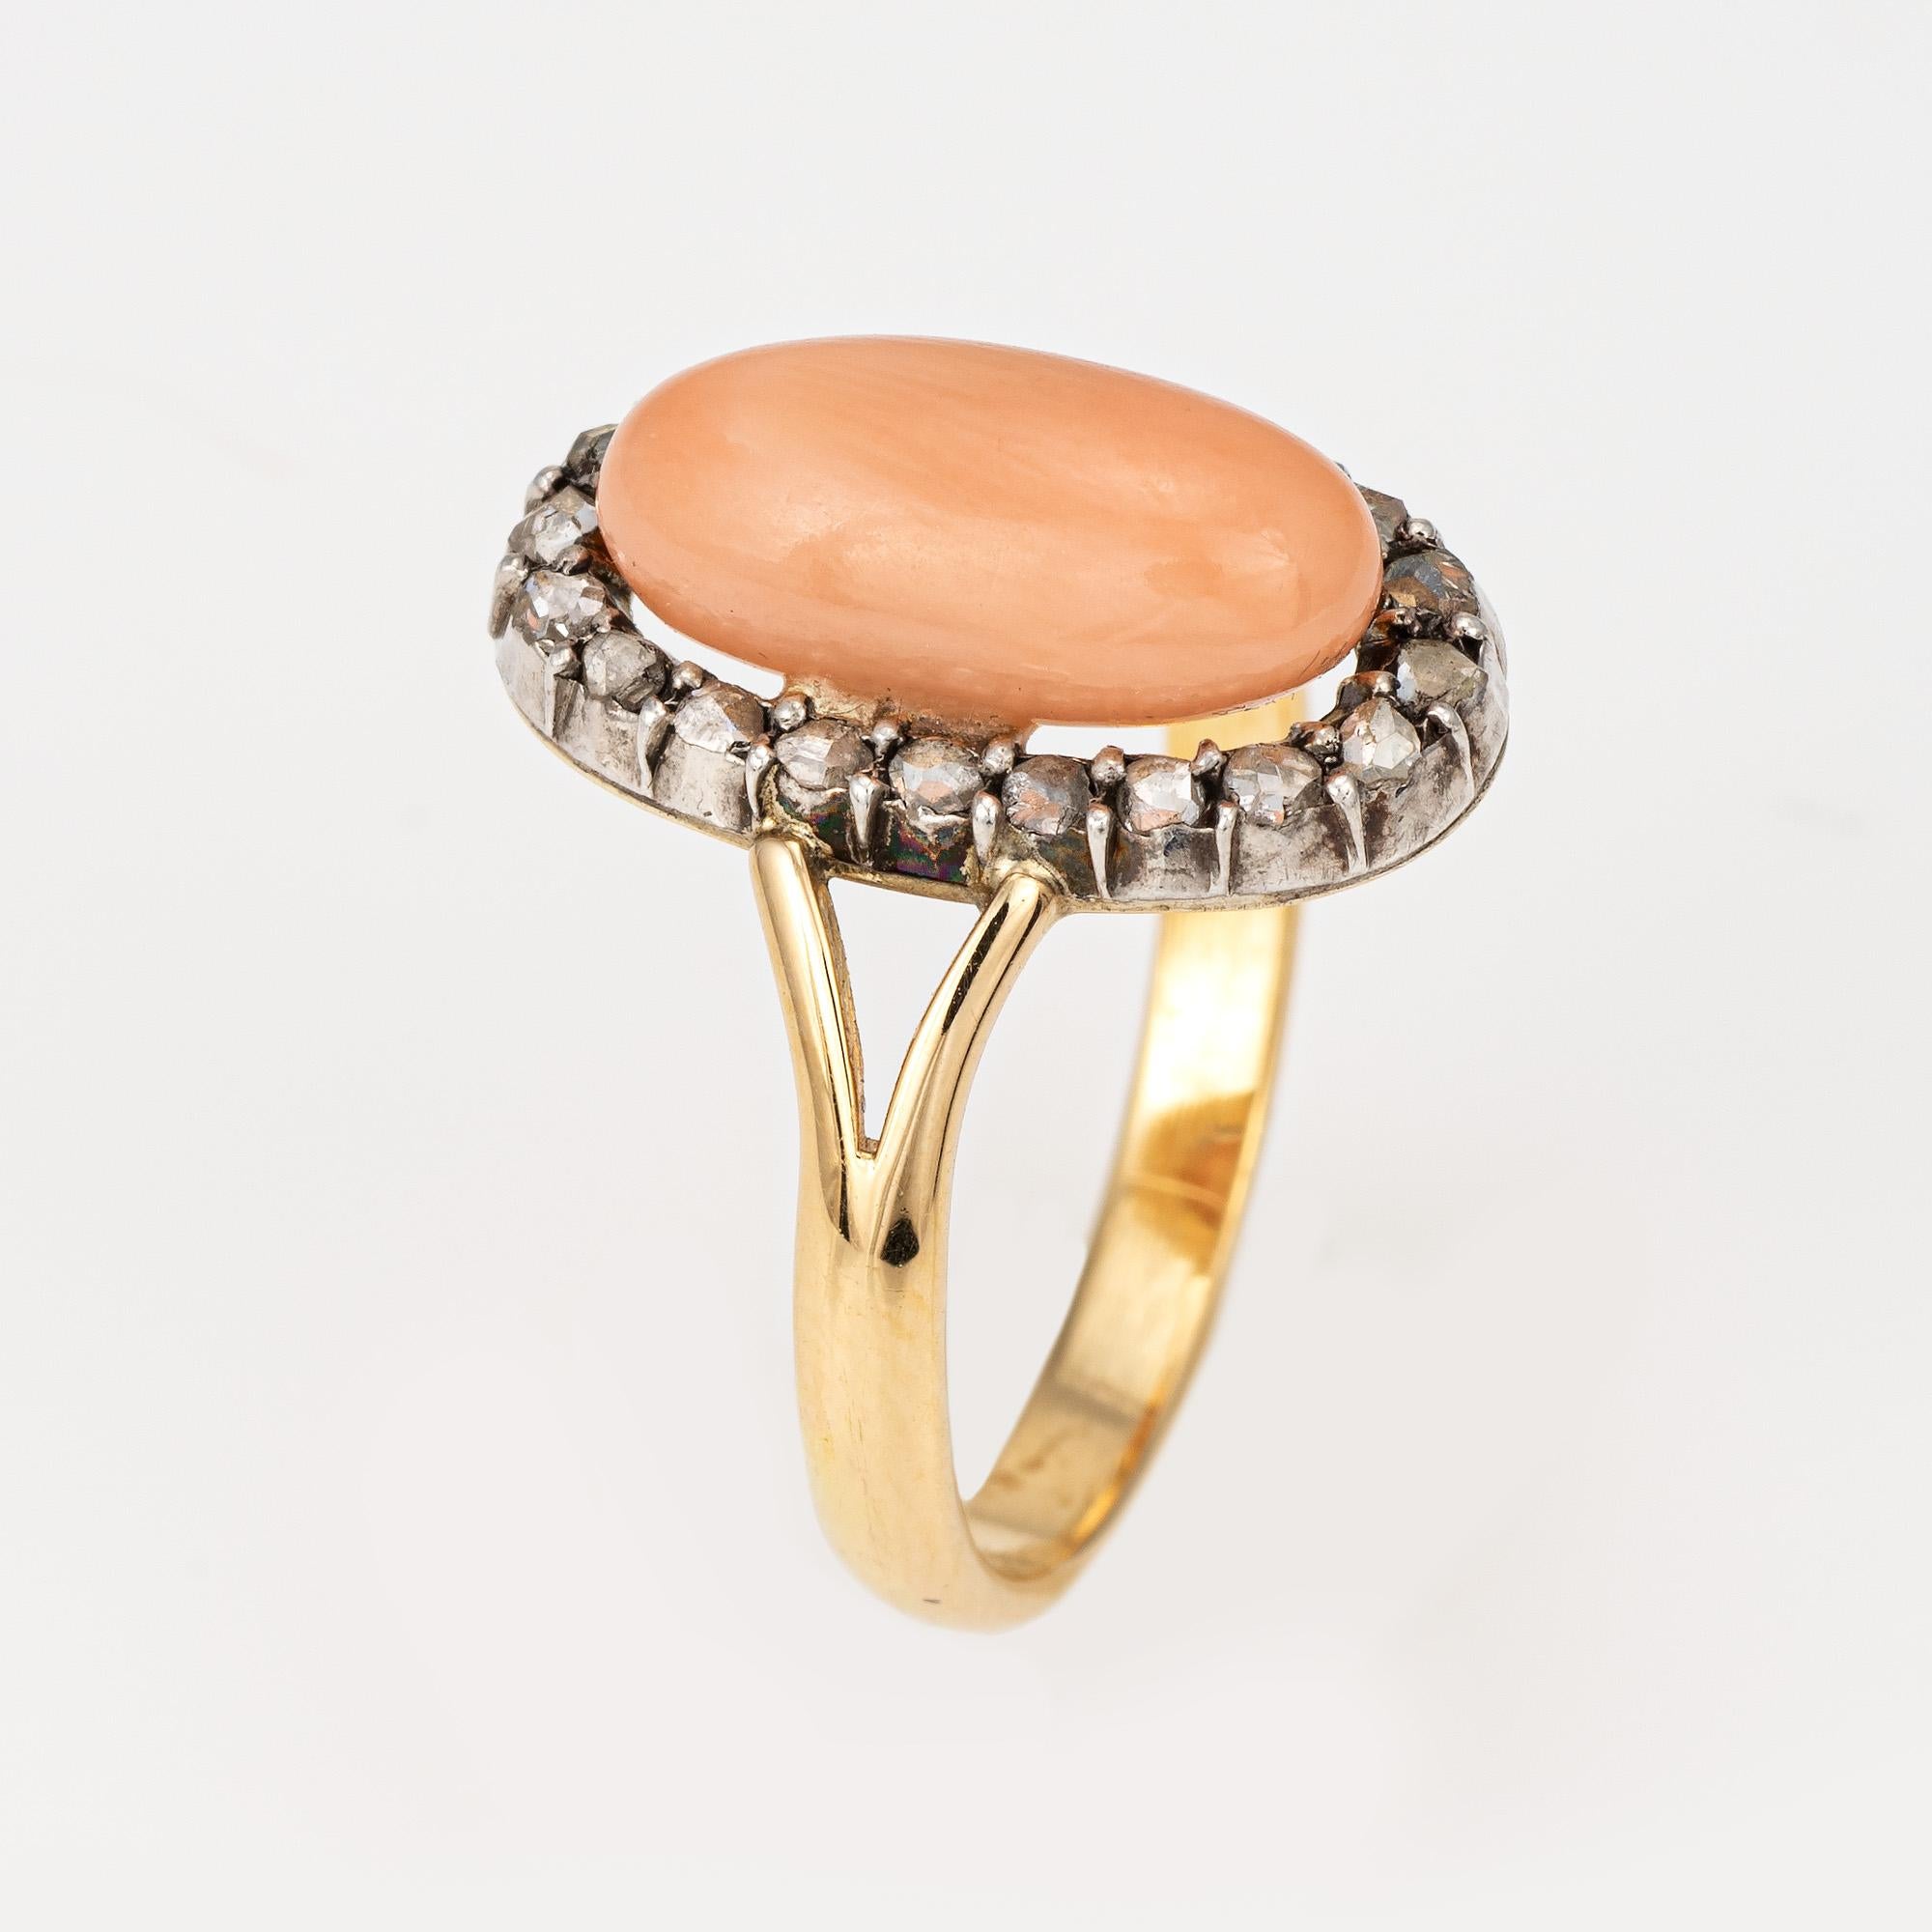 Stylish antique Victorian angel skin coral & diamond ring (circa 1880s to 1900s) crafted in 18 karat yellow gold. 

Cabochon cut angel skin coral measures 12mm x 5.5mm. The coral is in good condition and free of cracks or chips. 20 old rose cut